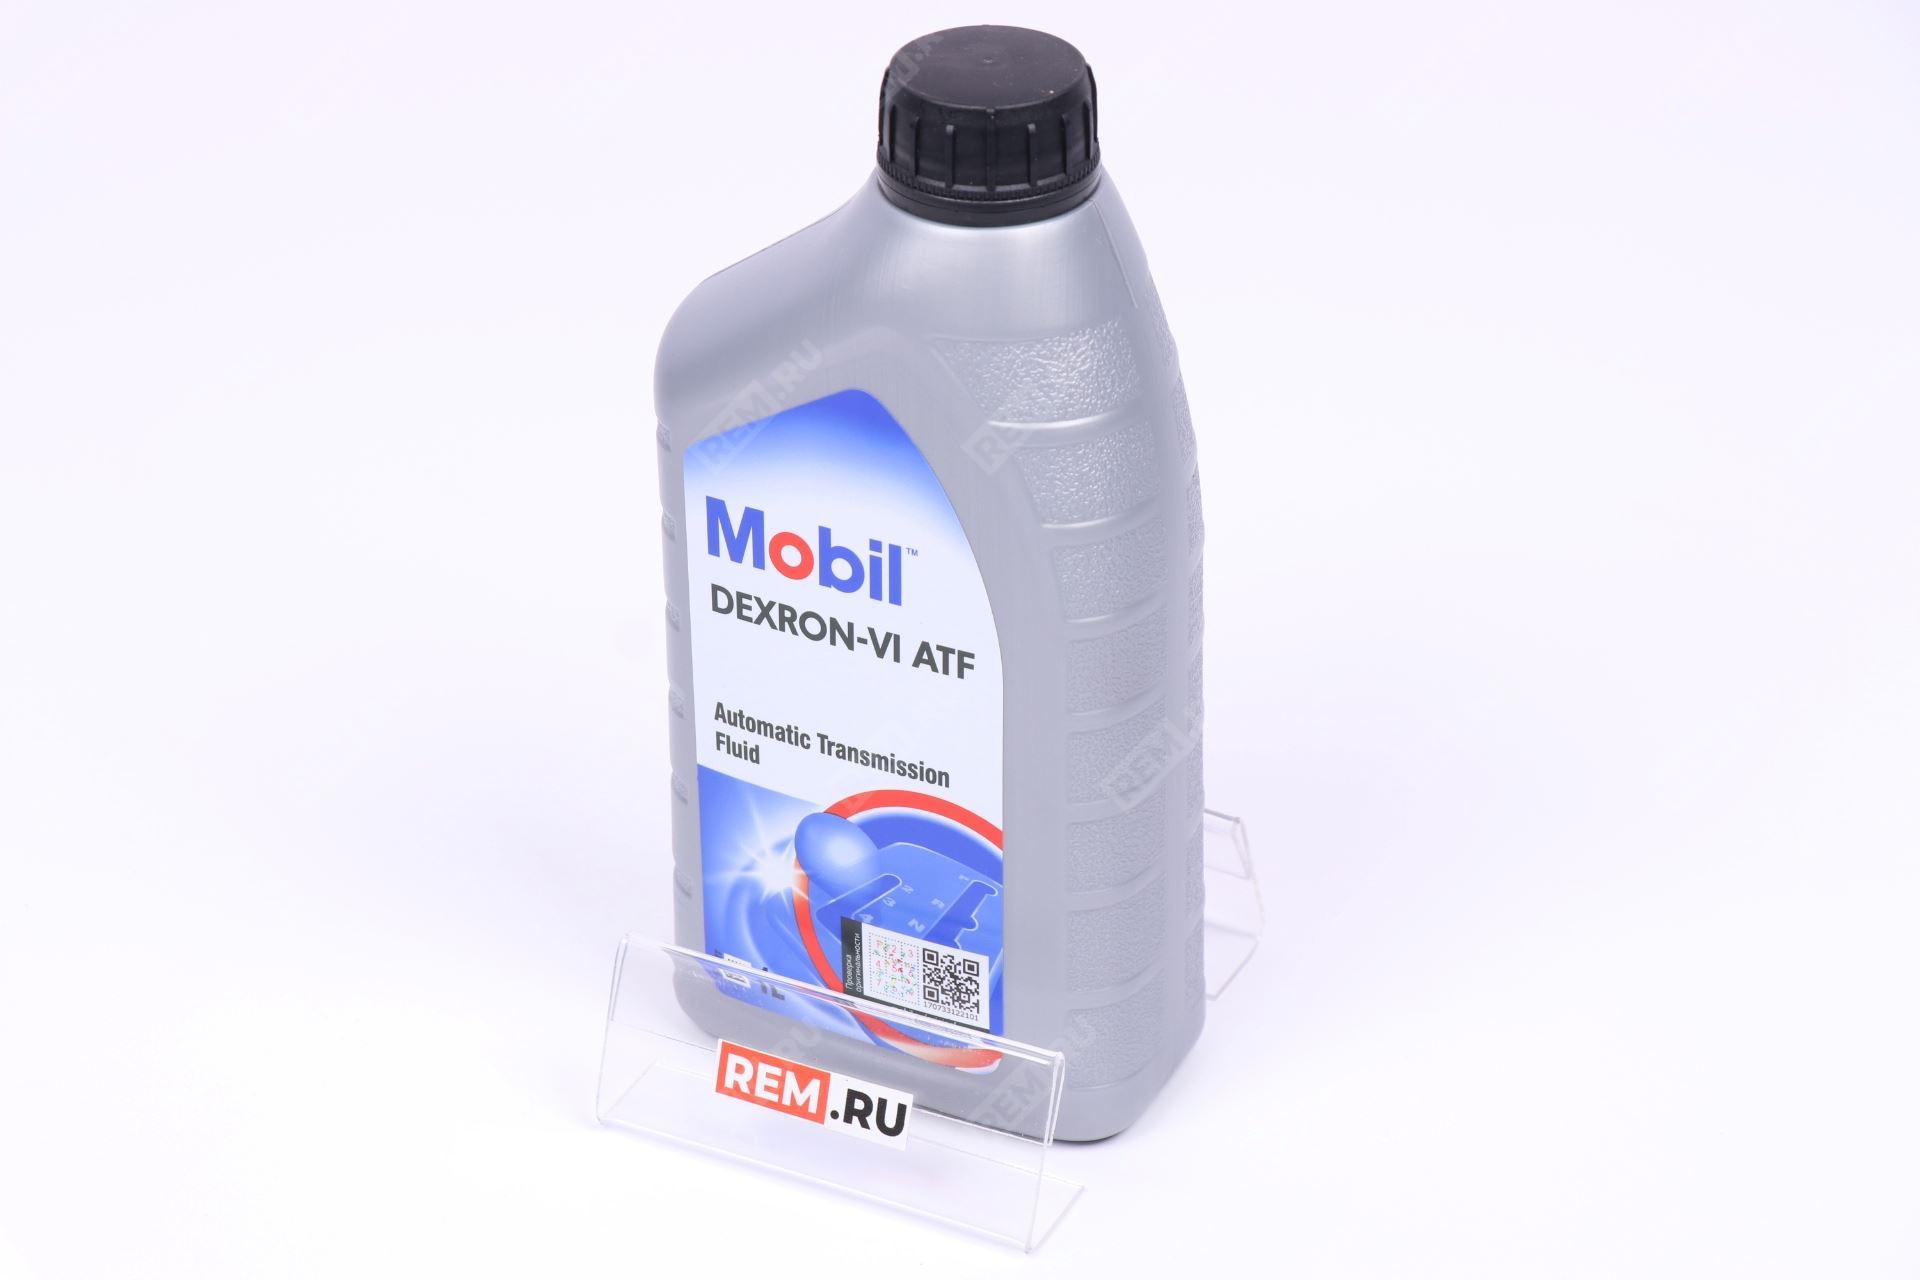 Масло atf dexron 6. Mobil ATF 220 1л. Mobil Dexron-vi ATF, 1л. Mobil ATF 220 1л (152647). Mobil ATF 220 артикул.